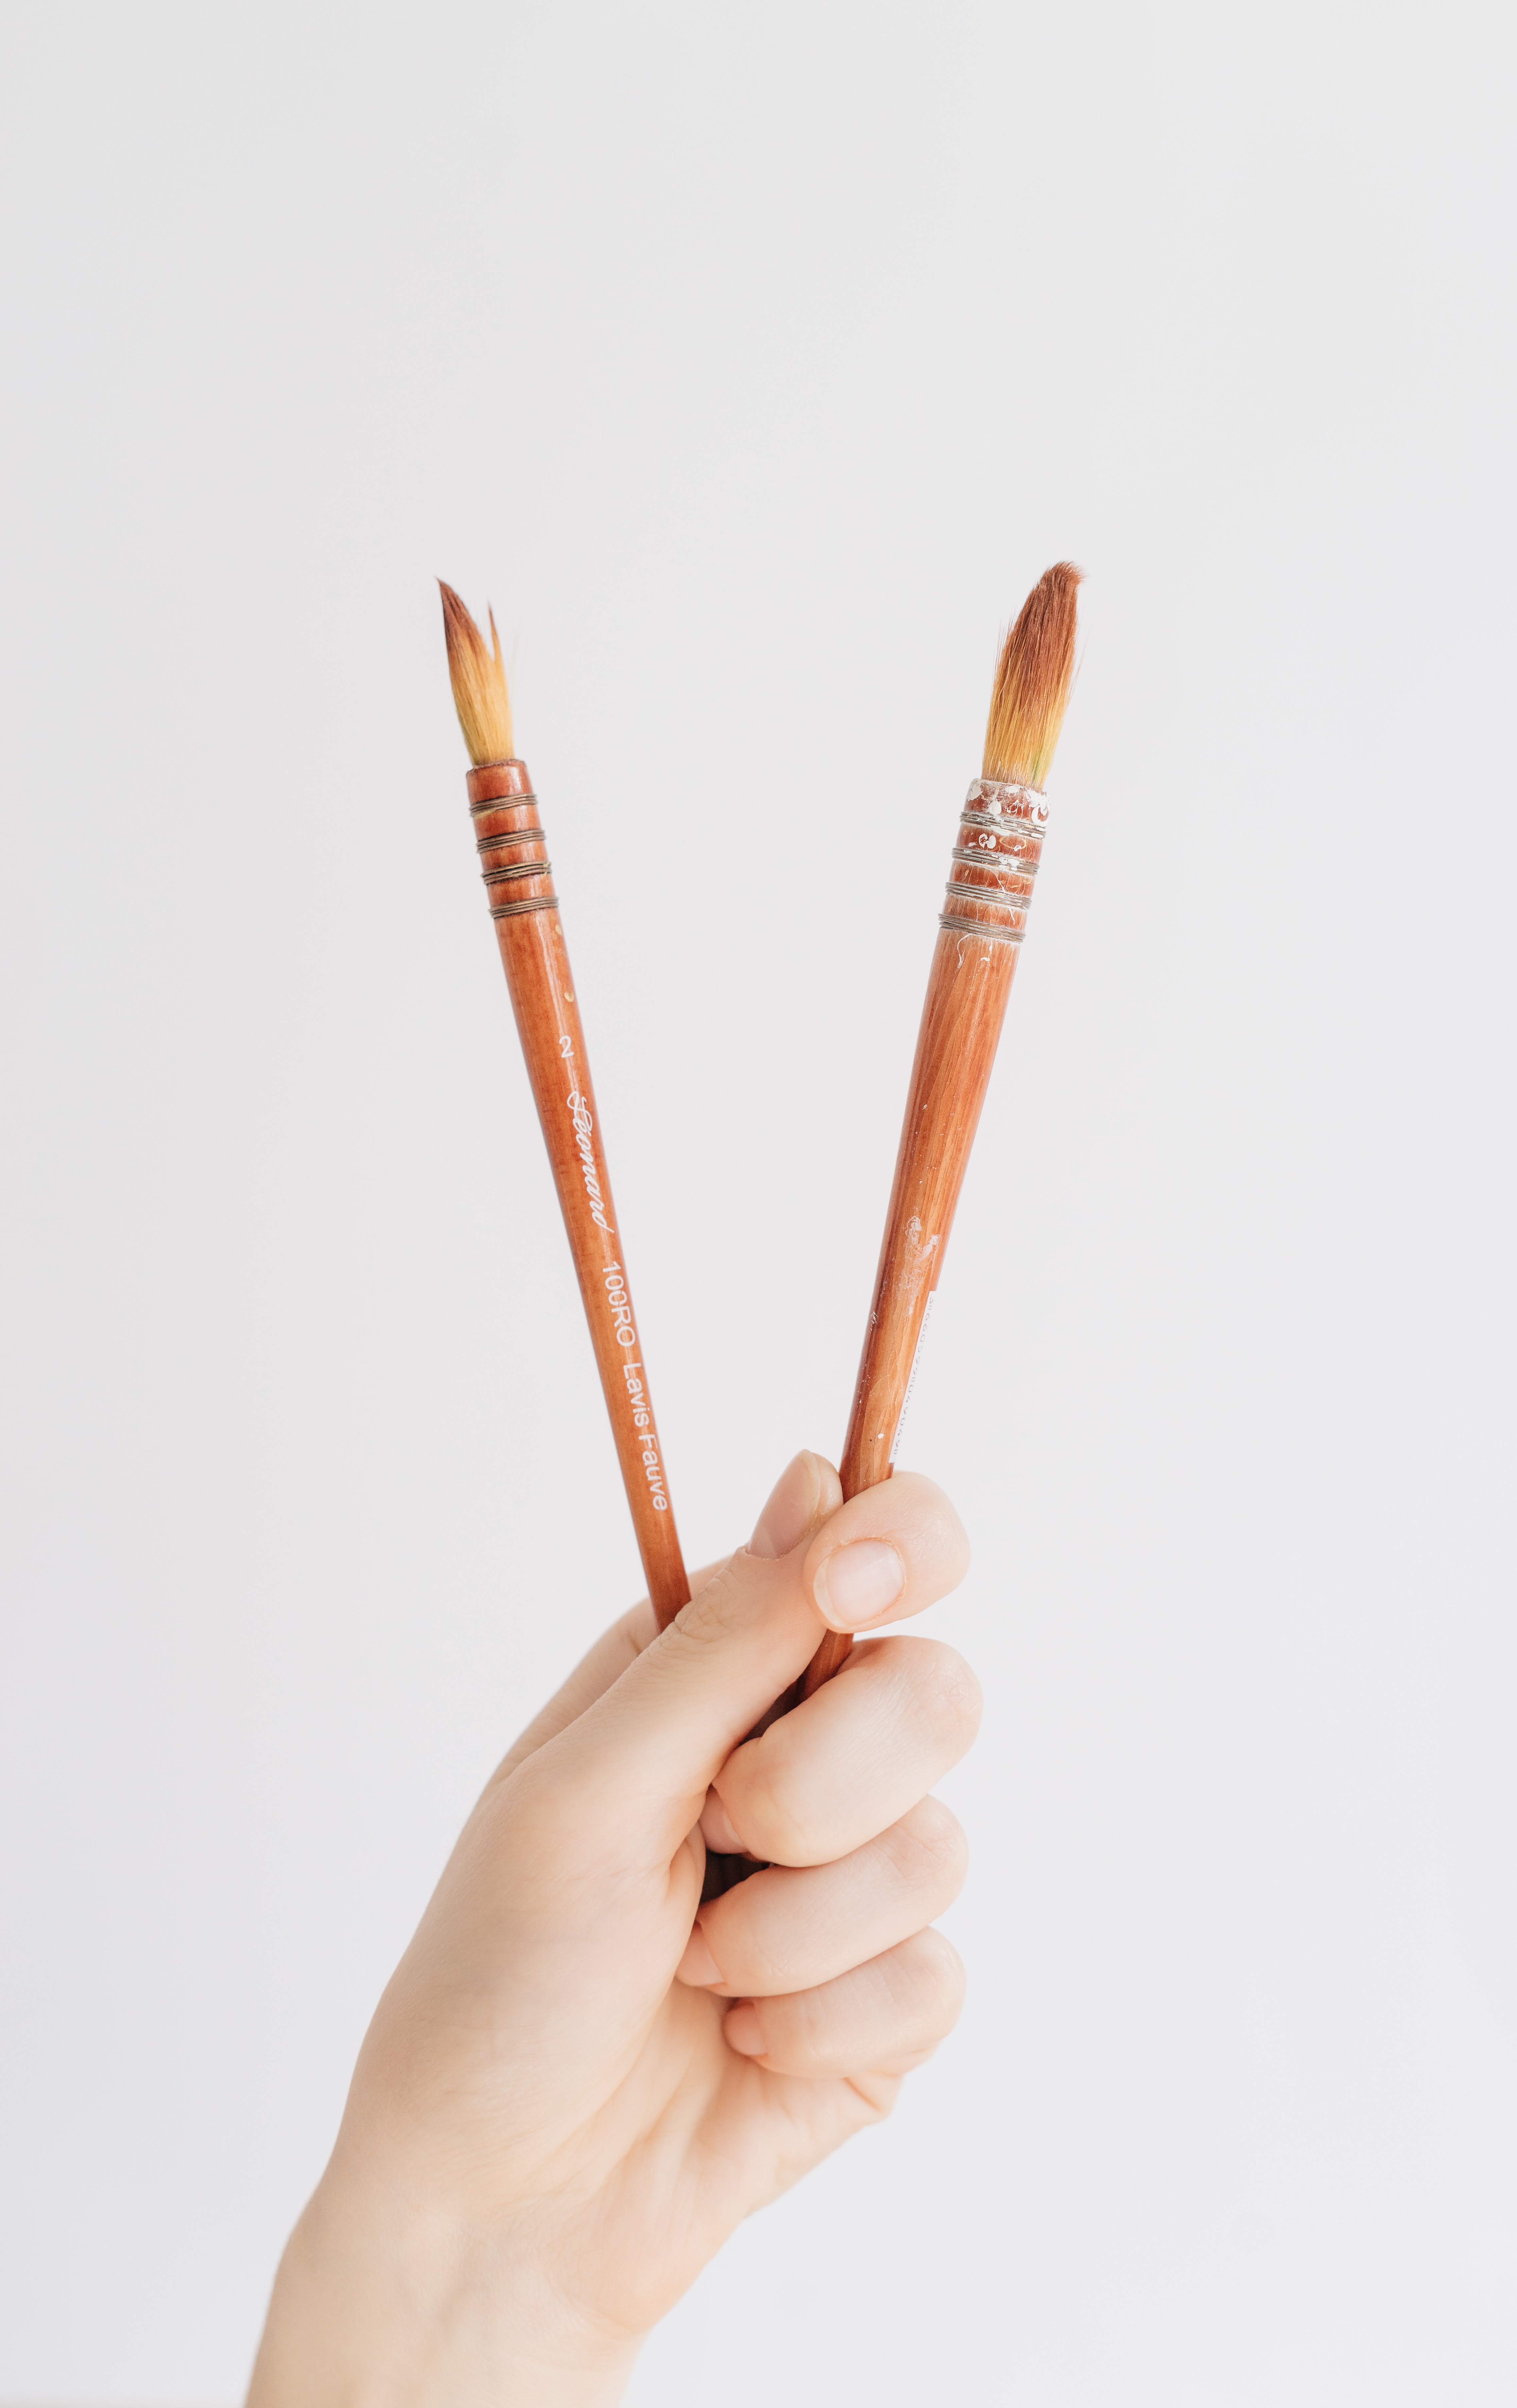 Two paintbrushes being held